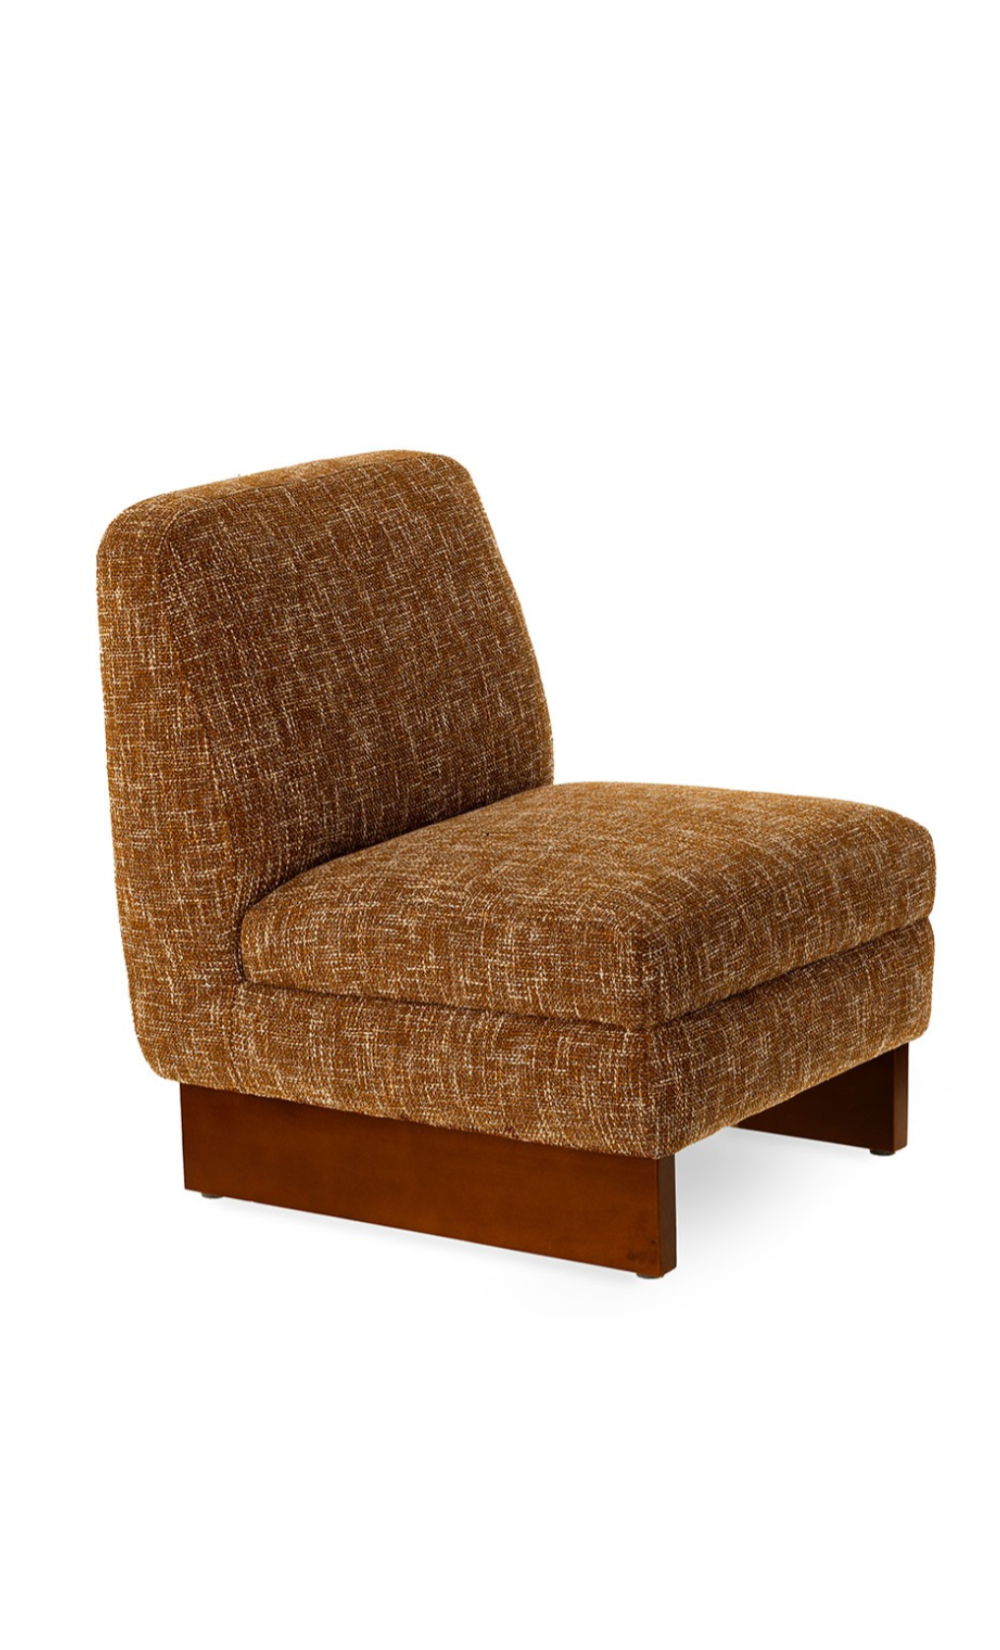 trinity-fauteuil-camel-chiné-seventies